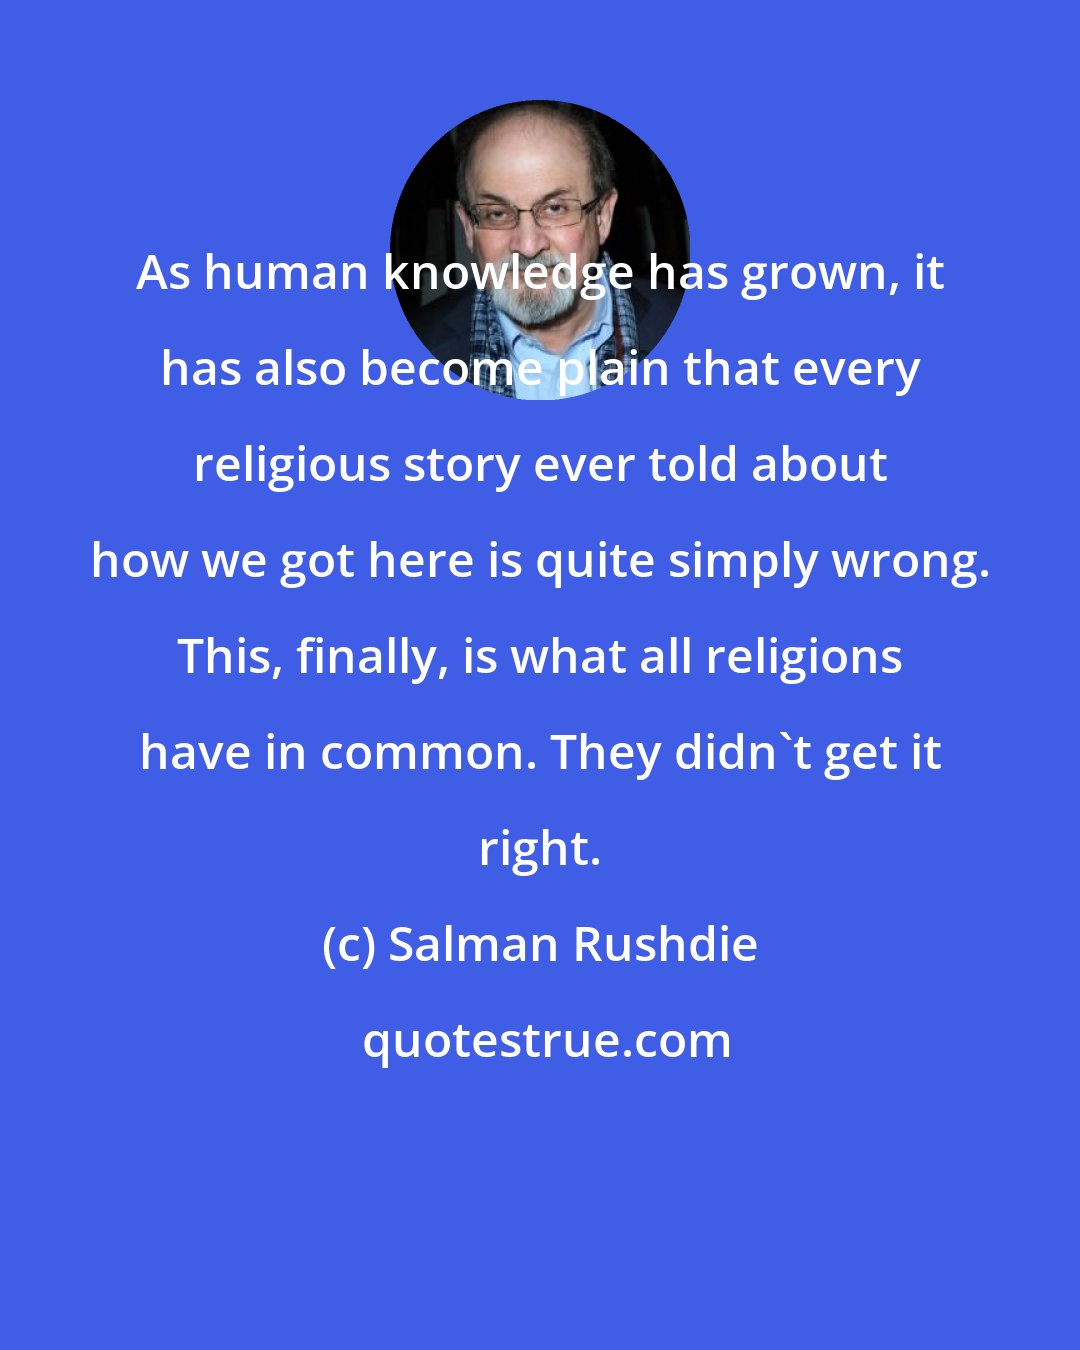 Salman Rushdie: As human knowledge has grown, it has also become plain that every religious story ever told about how we got here is quite simply wrong. This, finally, is what all religions have in common. They didn't get it right.